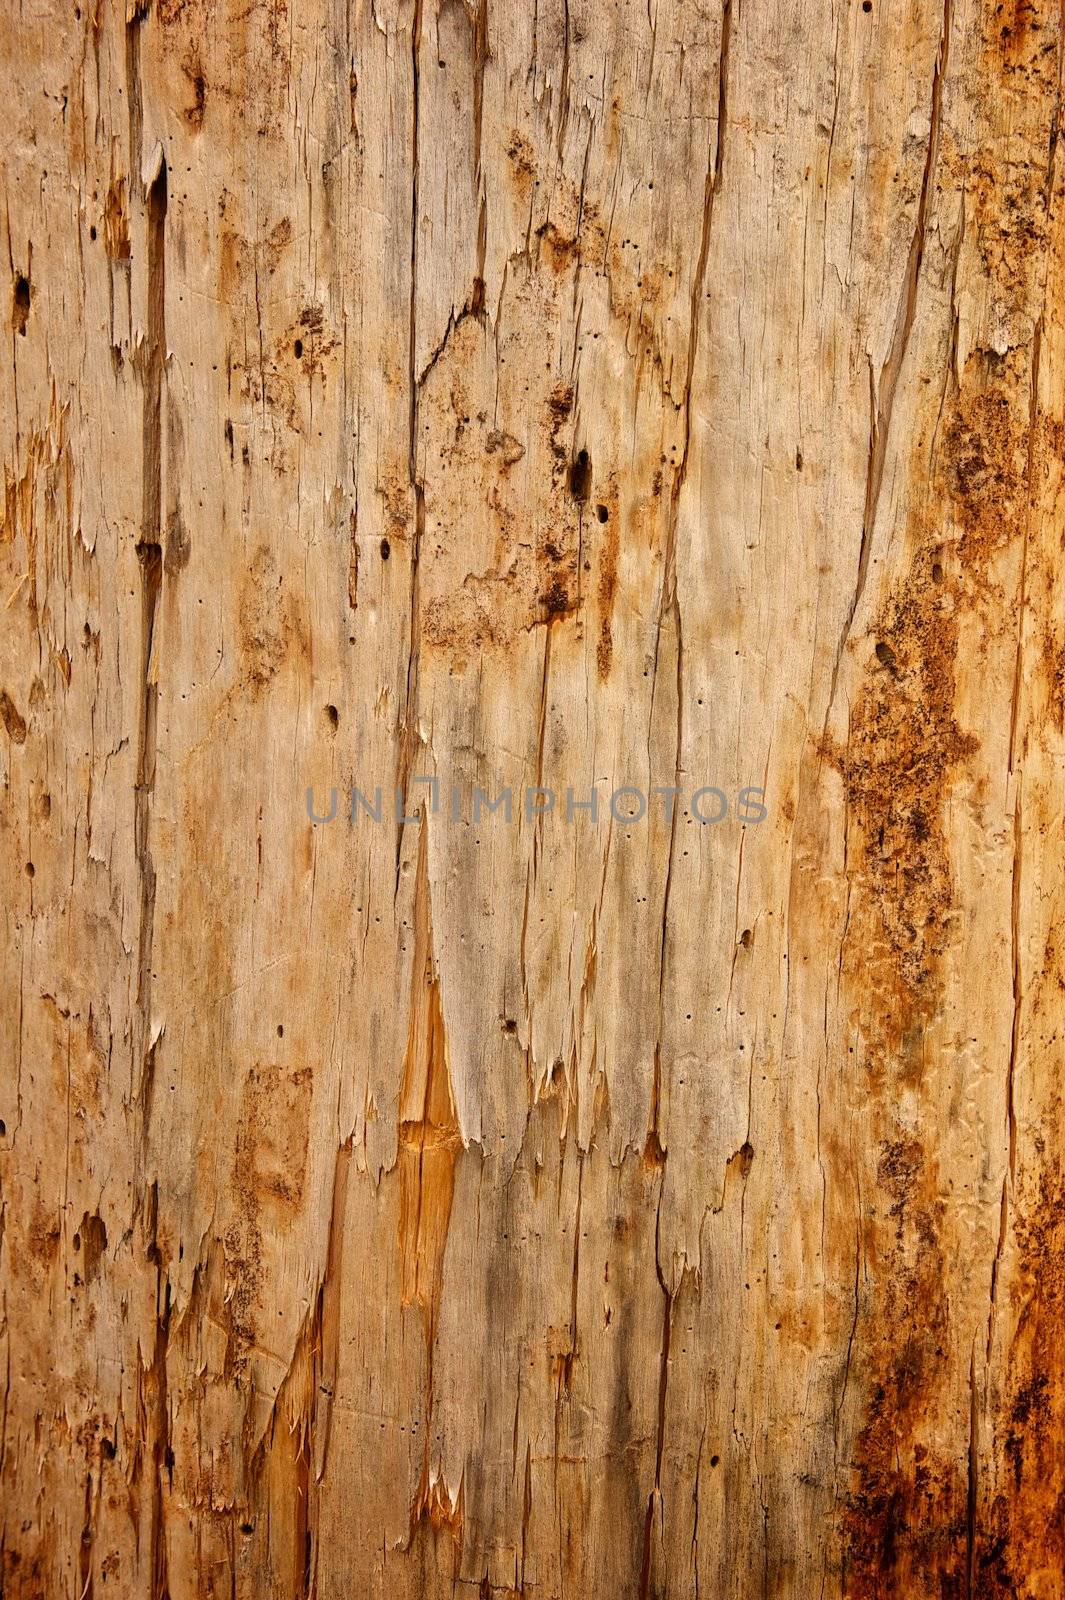 Tree Stripped of Bark Background by pixelsnap